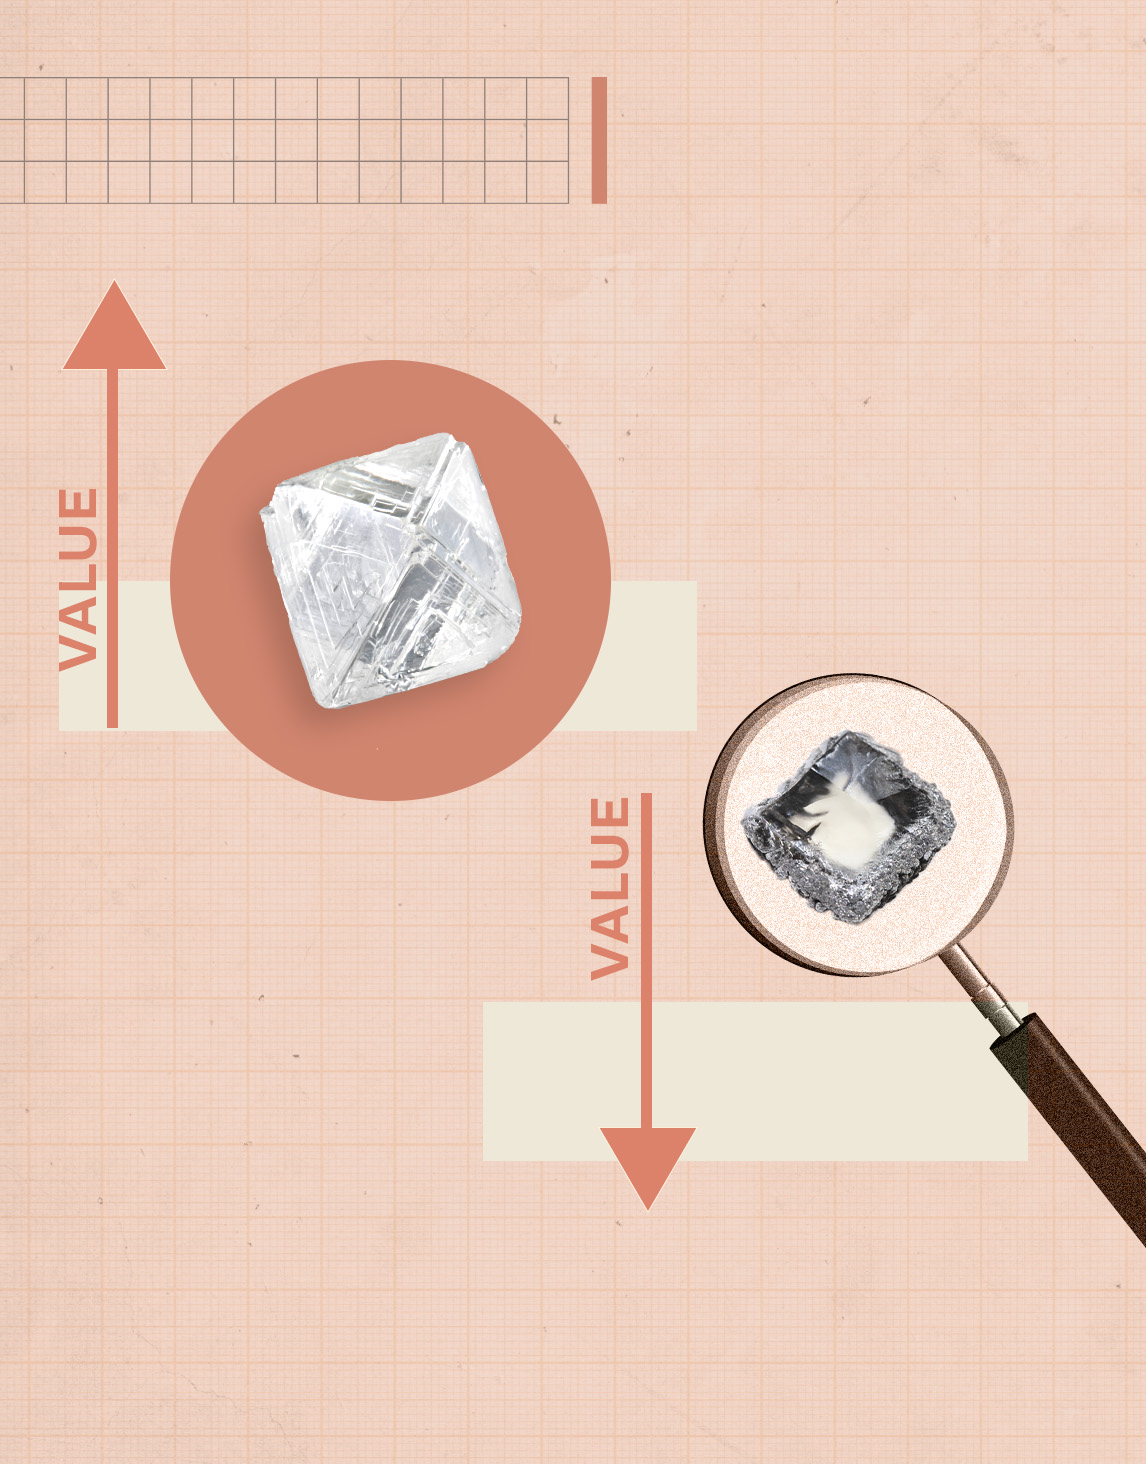  difference between laboratory-grown diamonds and natural diamonds